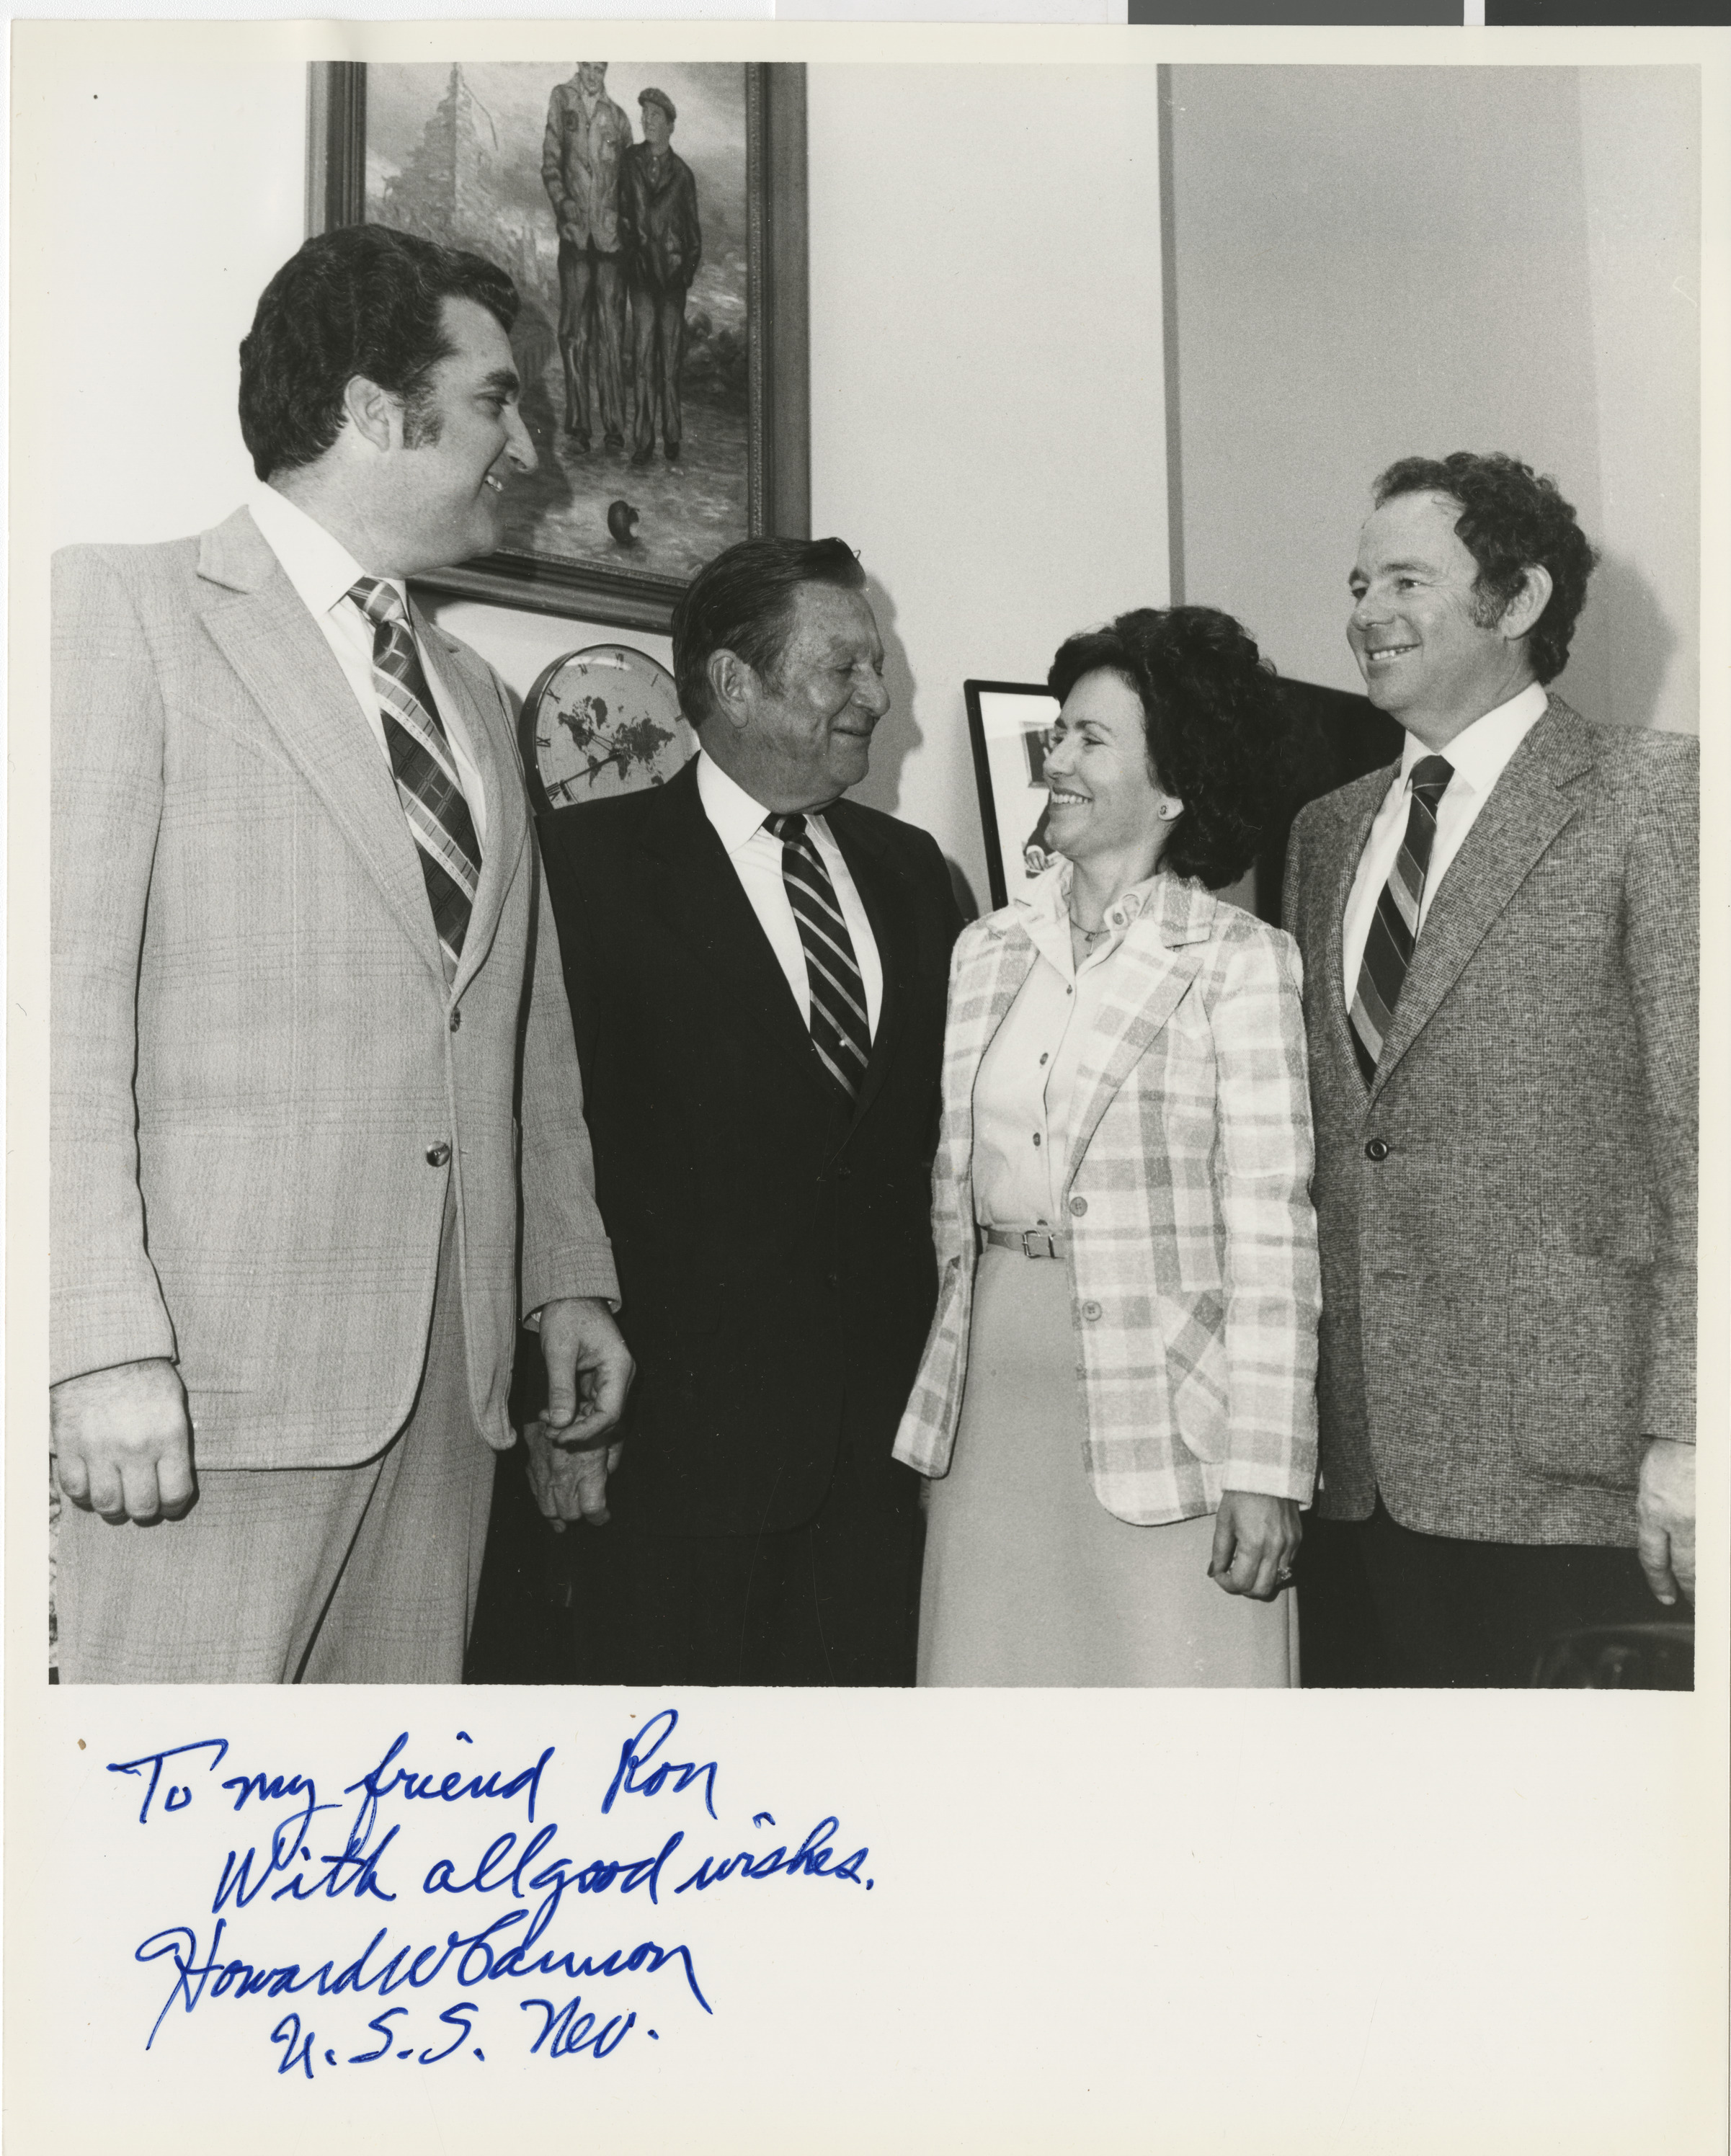 Photograph of Ron Lurie with Senator Howard Cannon, 1981